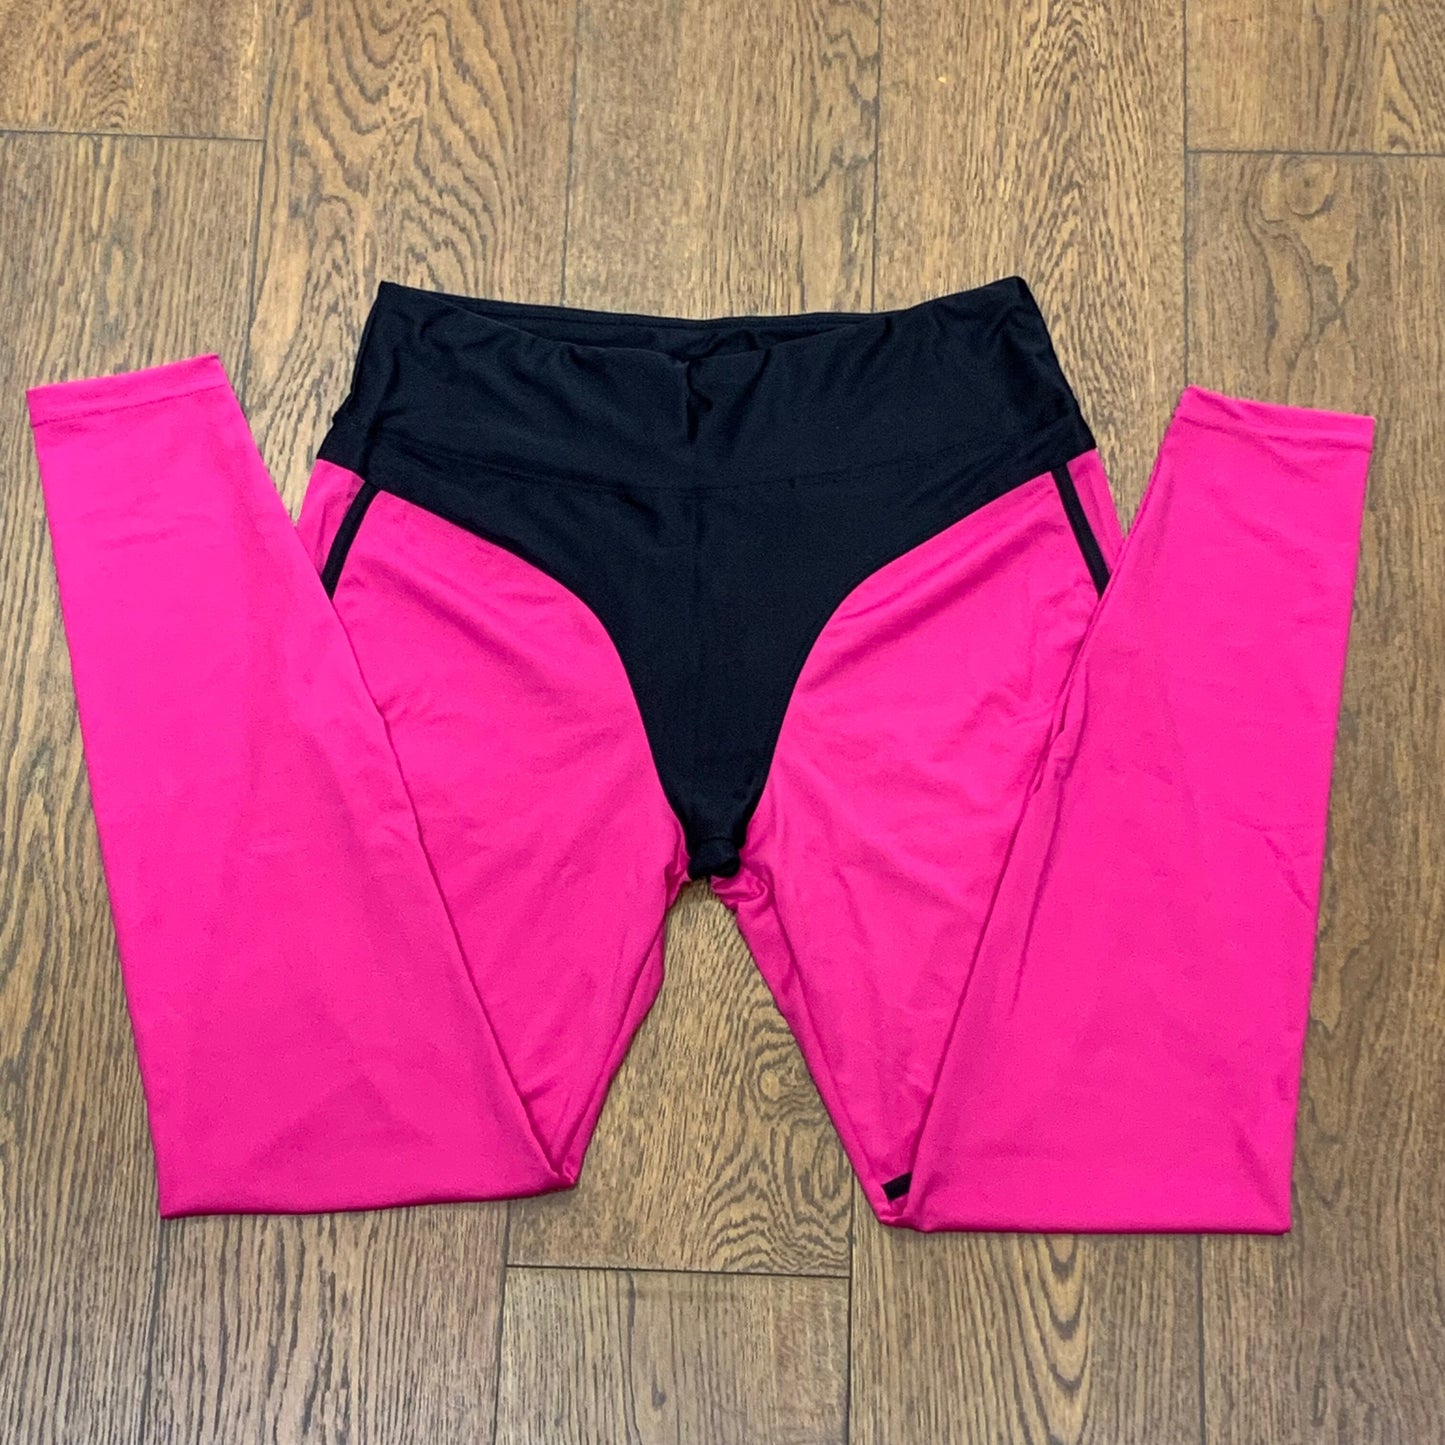 Sexy Neon 2-Piece outfit